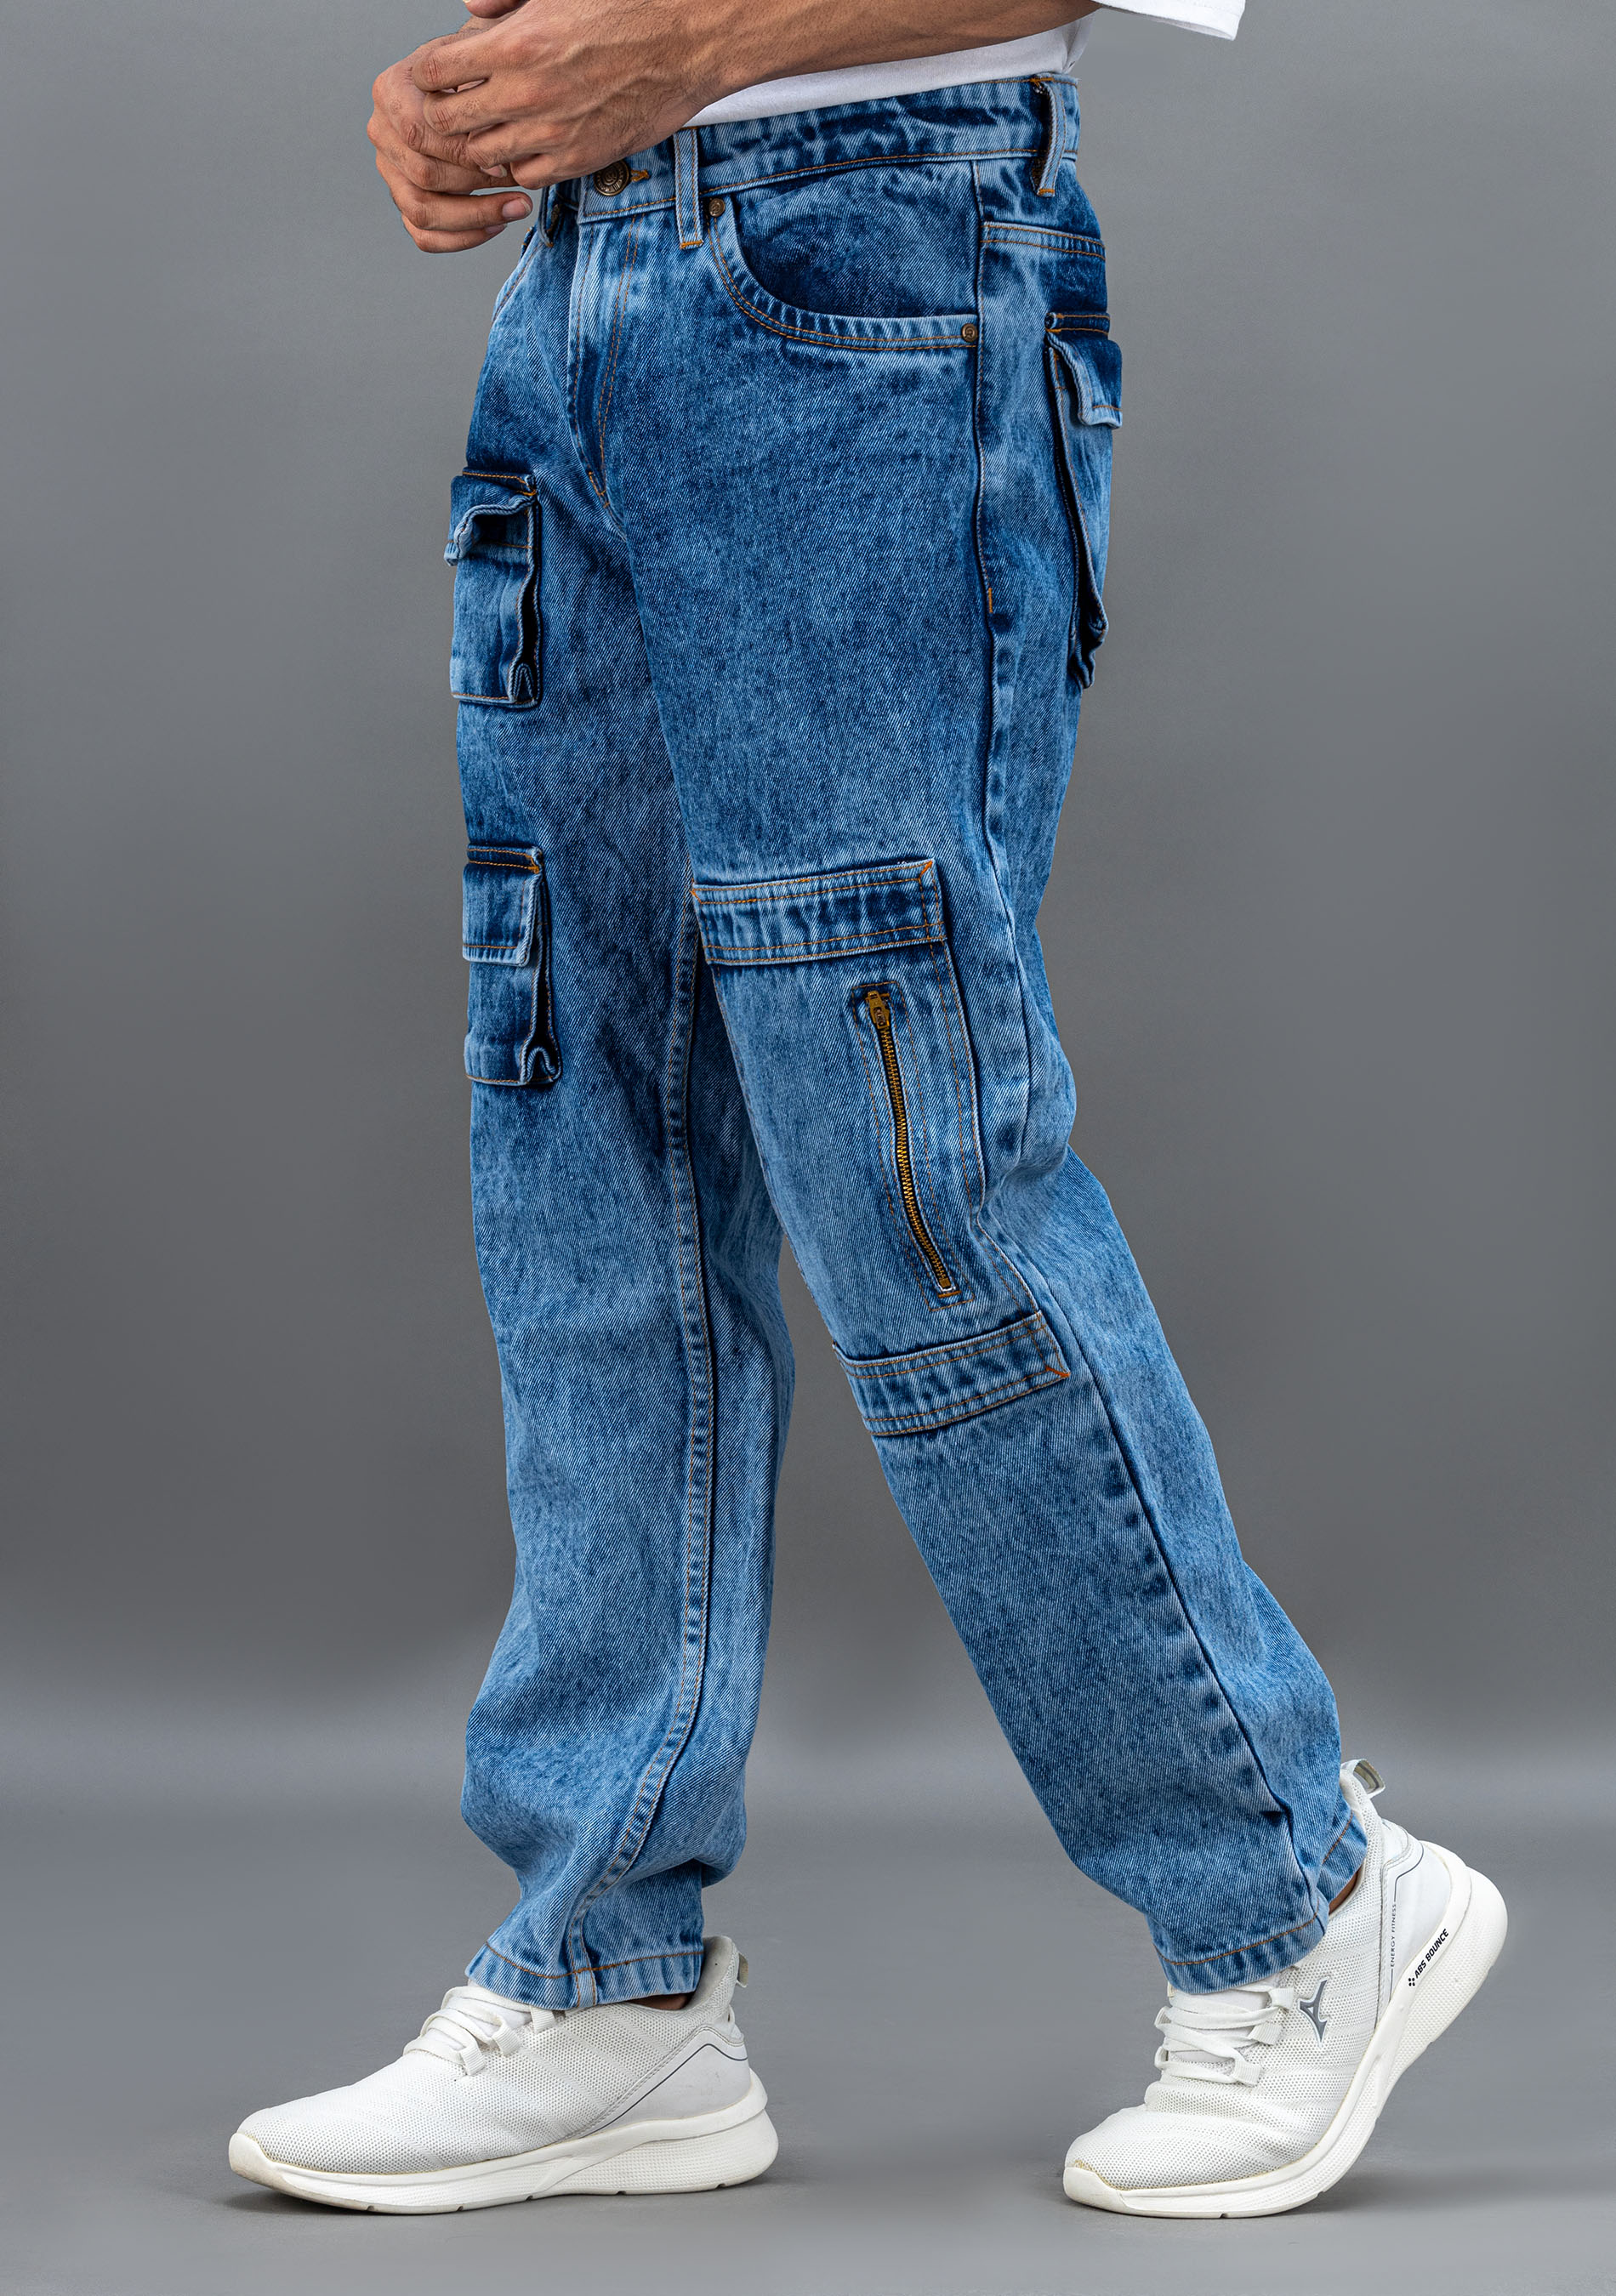 Blue Straight Fit Men's Fashion Jeans - Buy Online in India @ Mehar